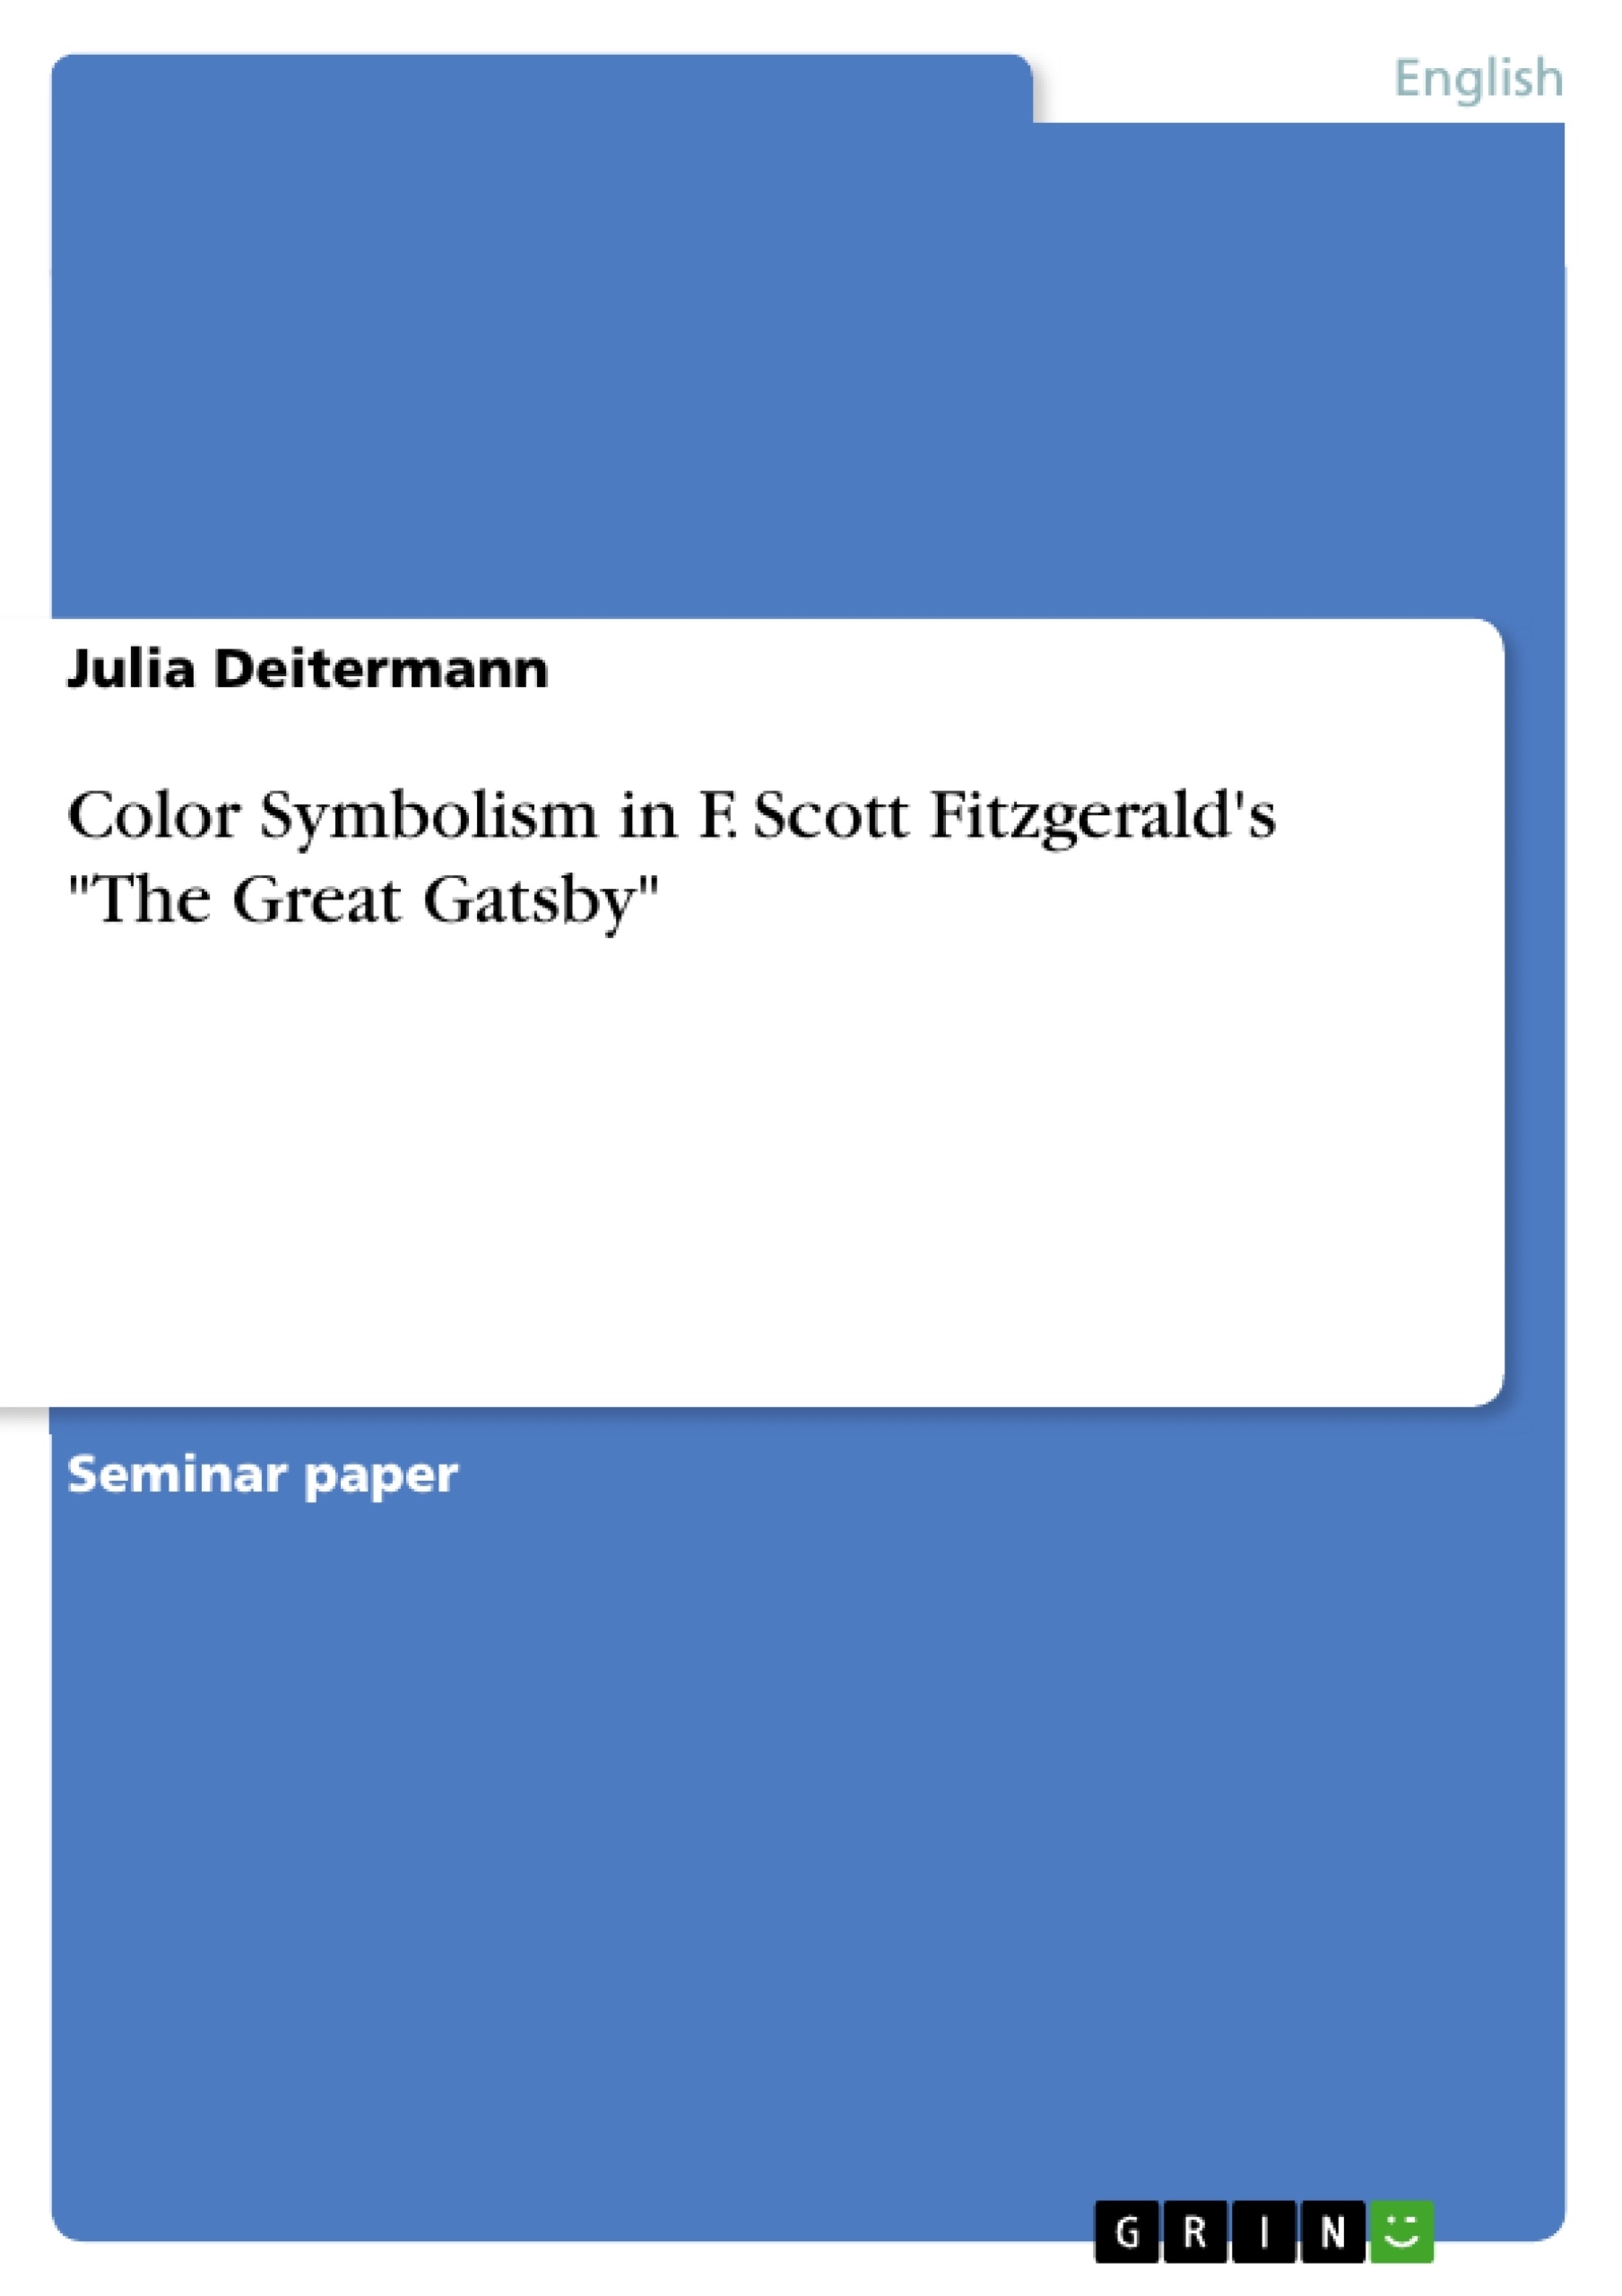 Title: Color Symbolism in F. Scott Fitzgerald's "The Great Gatsby"